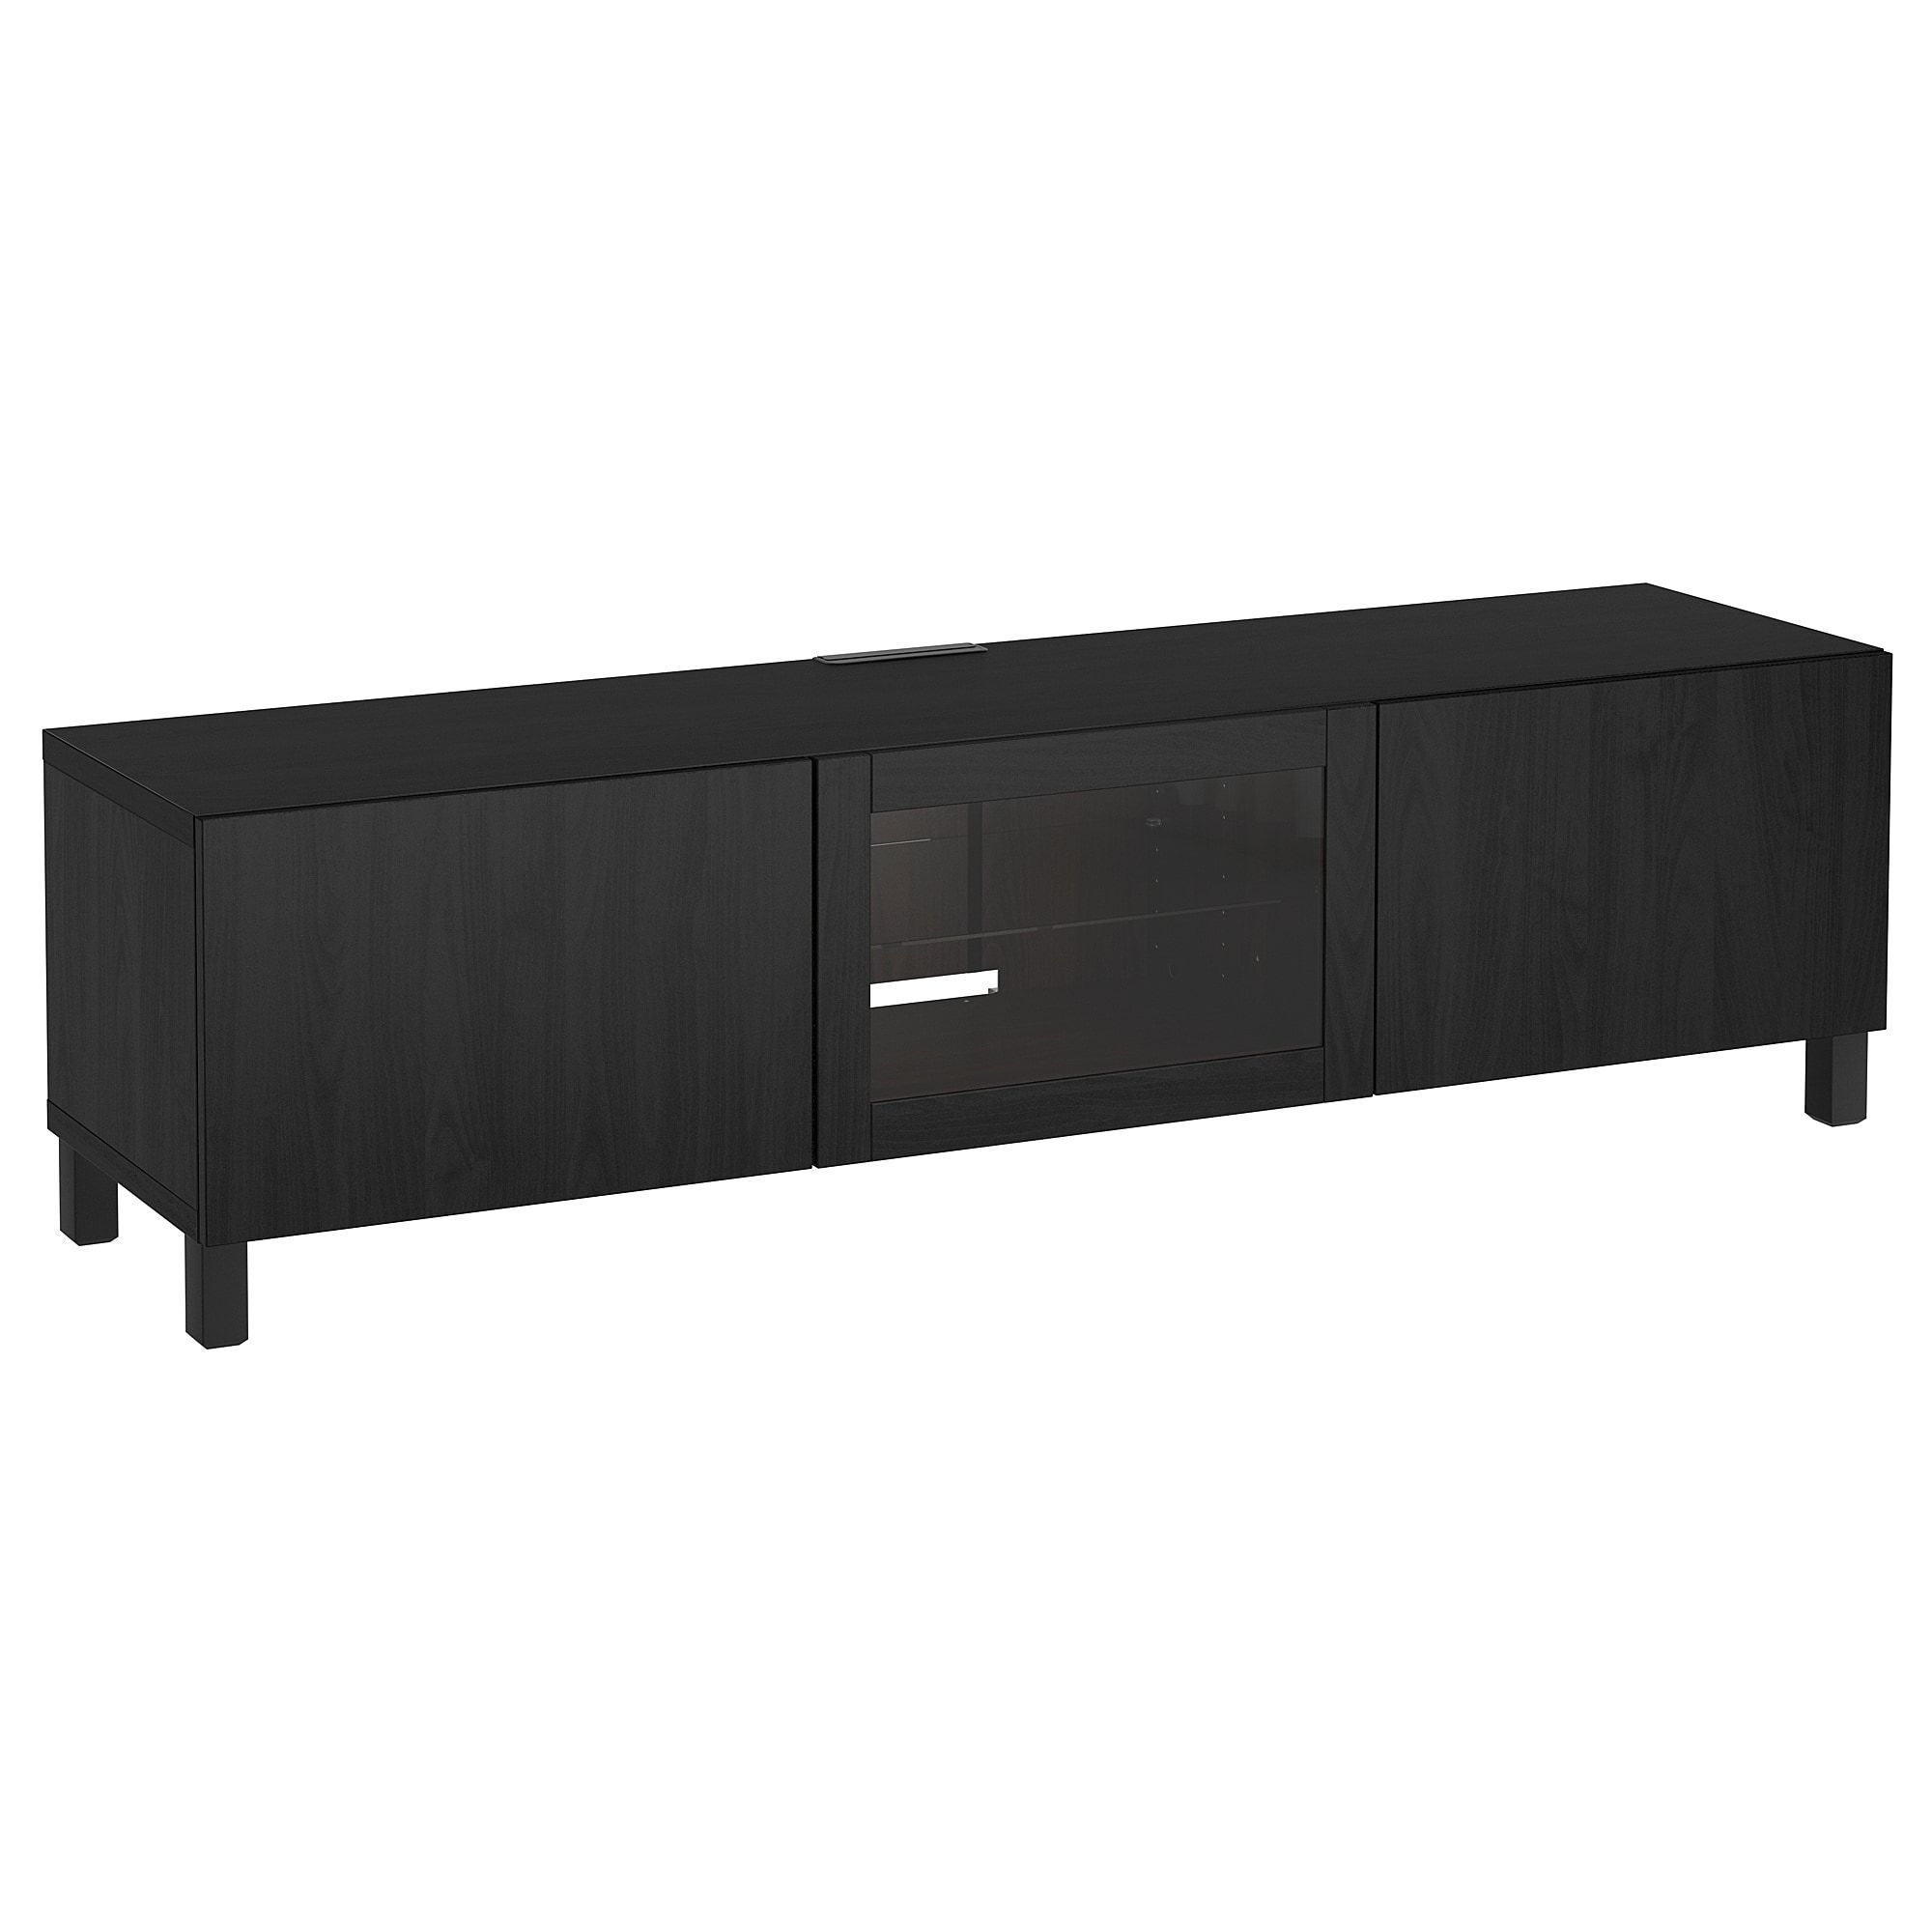 Black Tv Cabinets With Drawers With Widely Used Bestå Tv Unit With Drawers And Door – Lappviken Black Brown Clear (View 4 of 20)